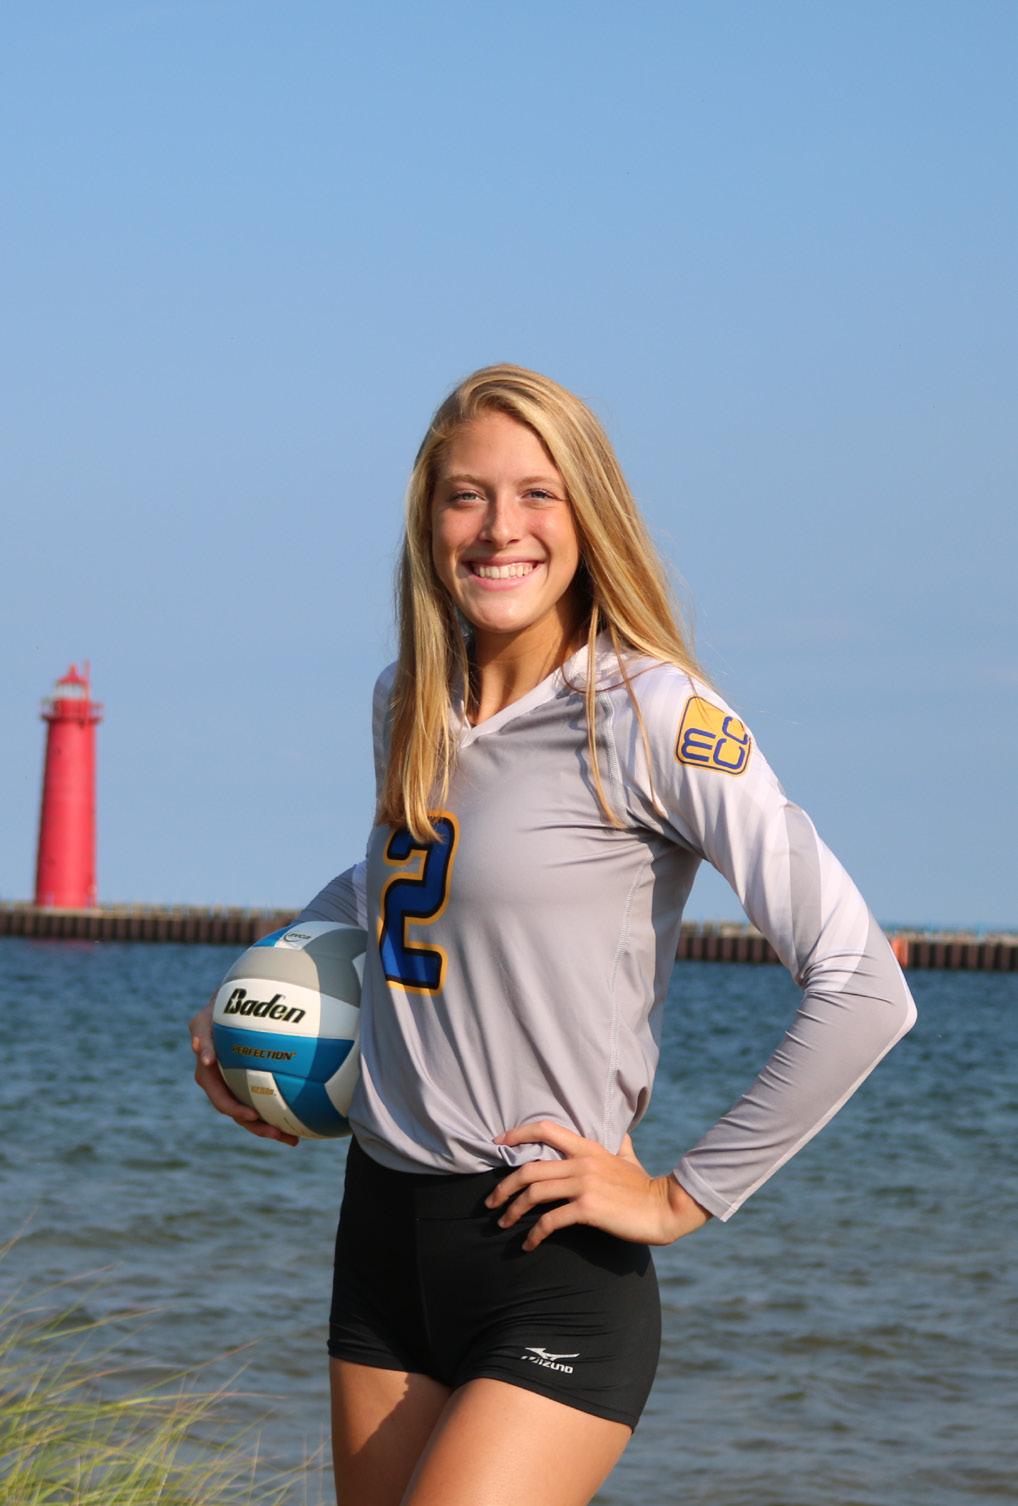 .. Reading & hanging out with friends Name:...Julie Brown Height:...6 0 Position:... Middle Hitter Parents:... Ron & Theresa Hometown:... North Muskegon, MI High School:.